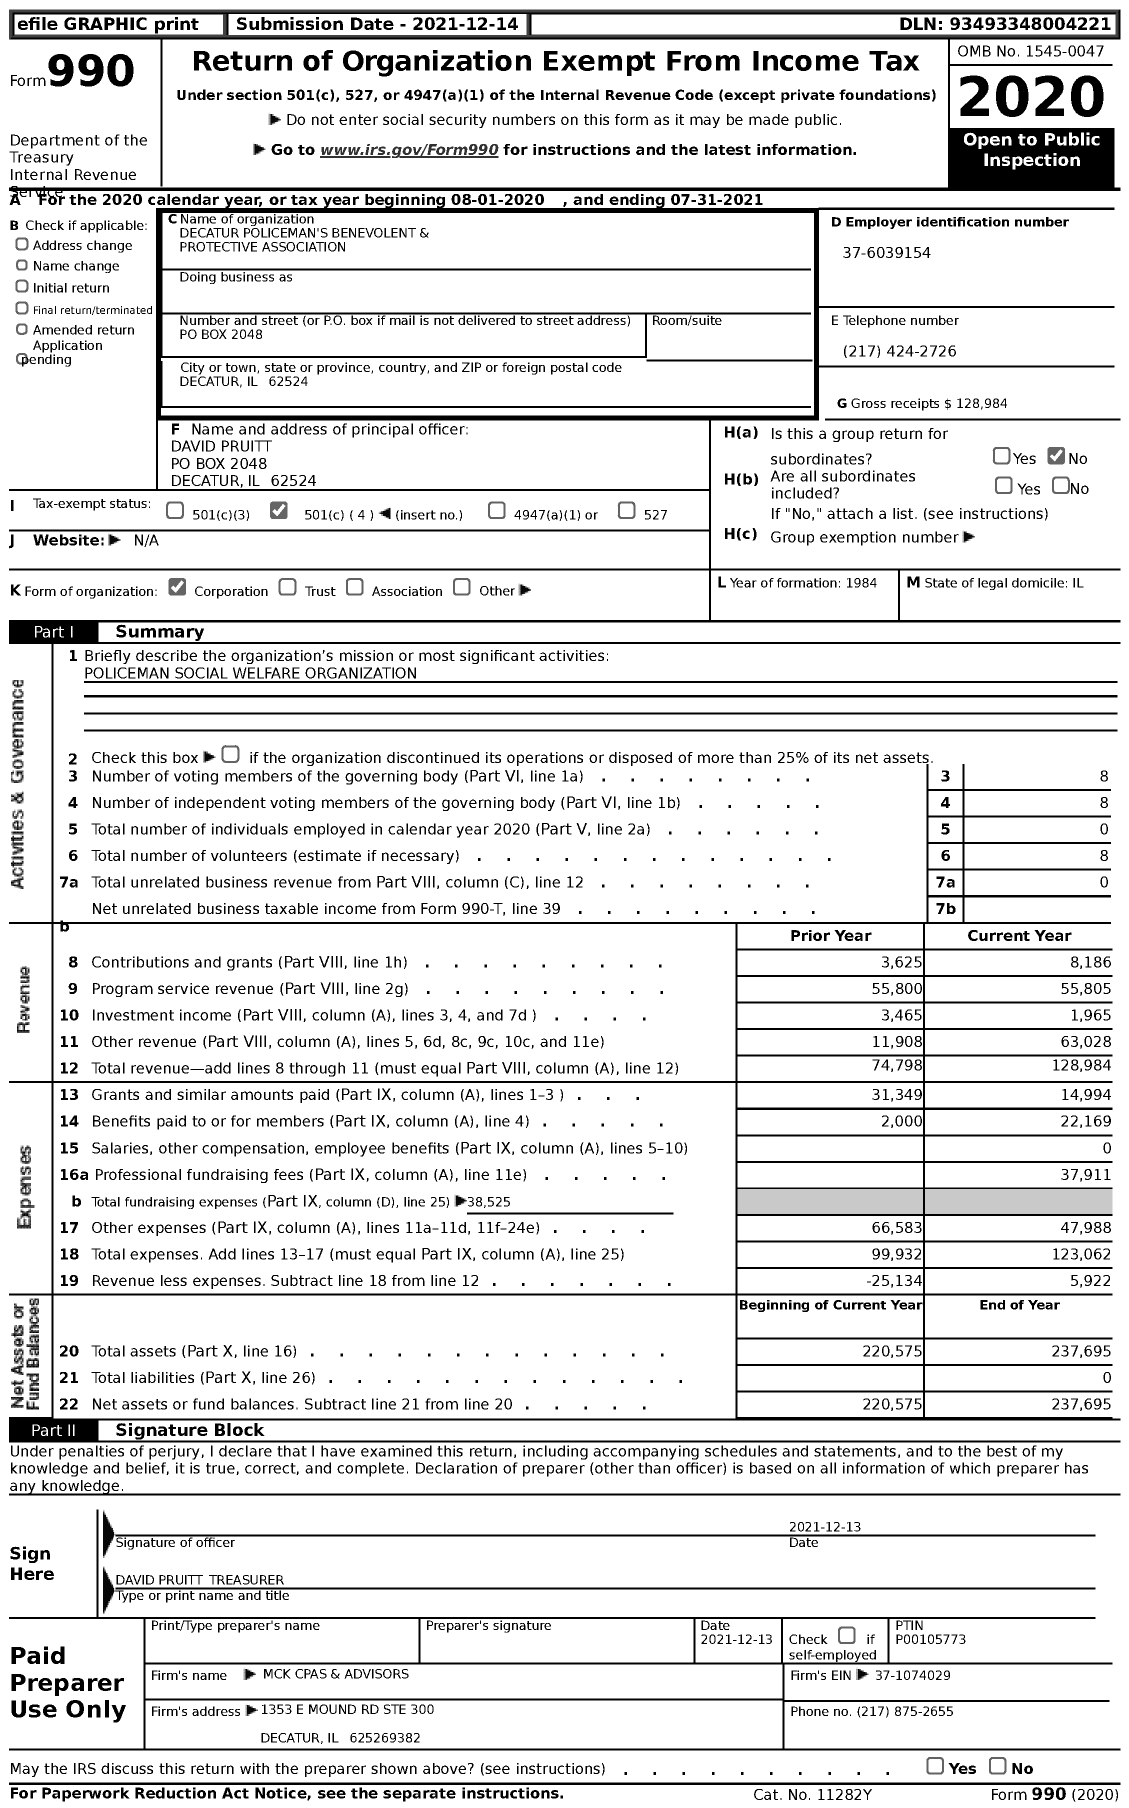 Image of first page of 2020 Form 990 for Decatur Policeman's Benevolent and Protective Association